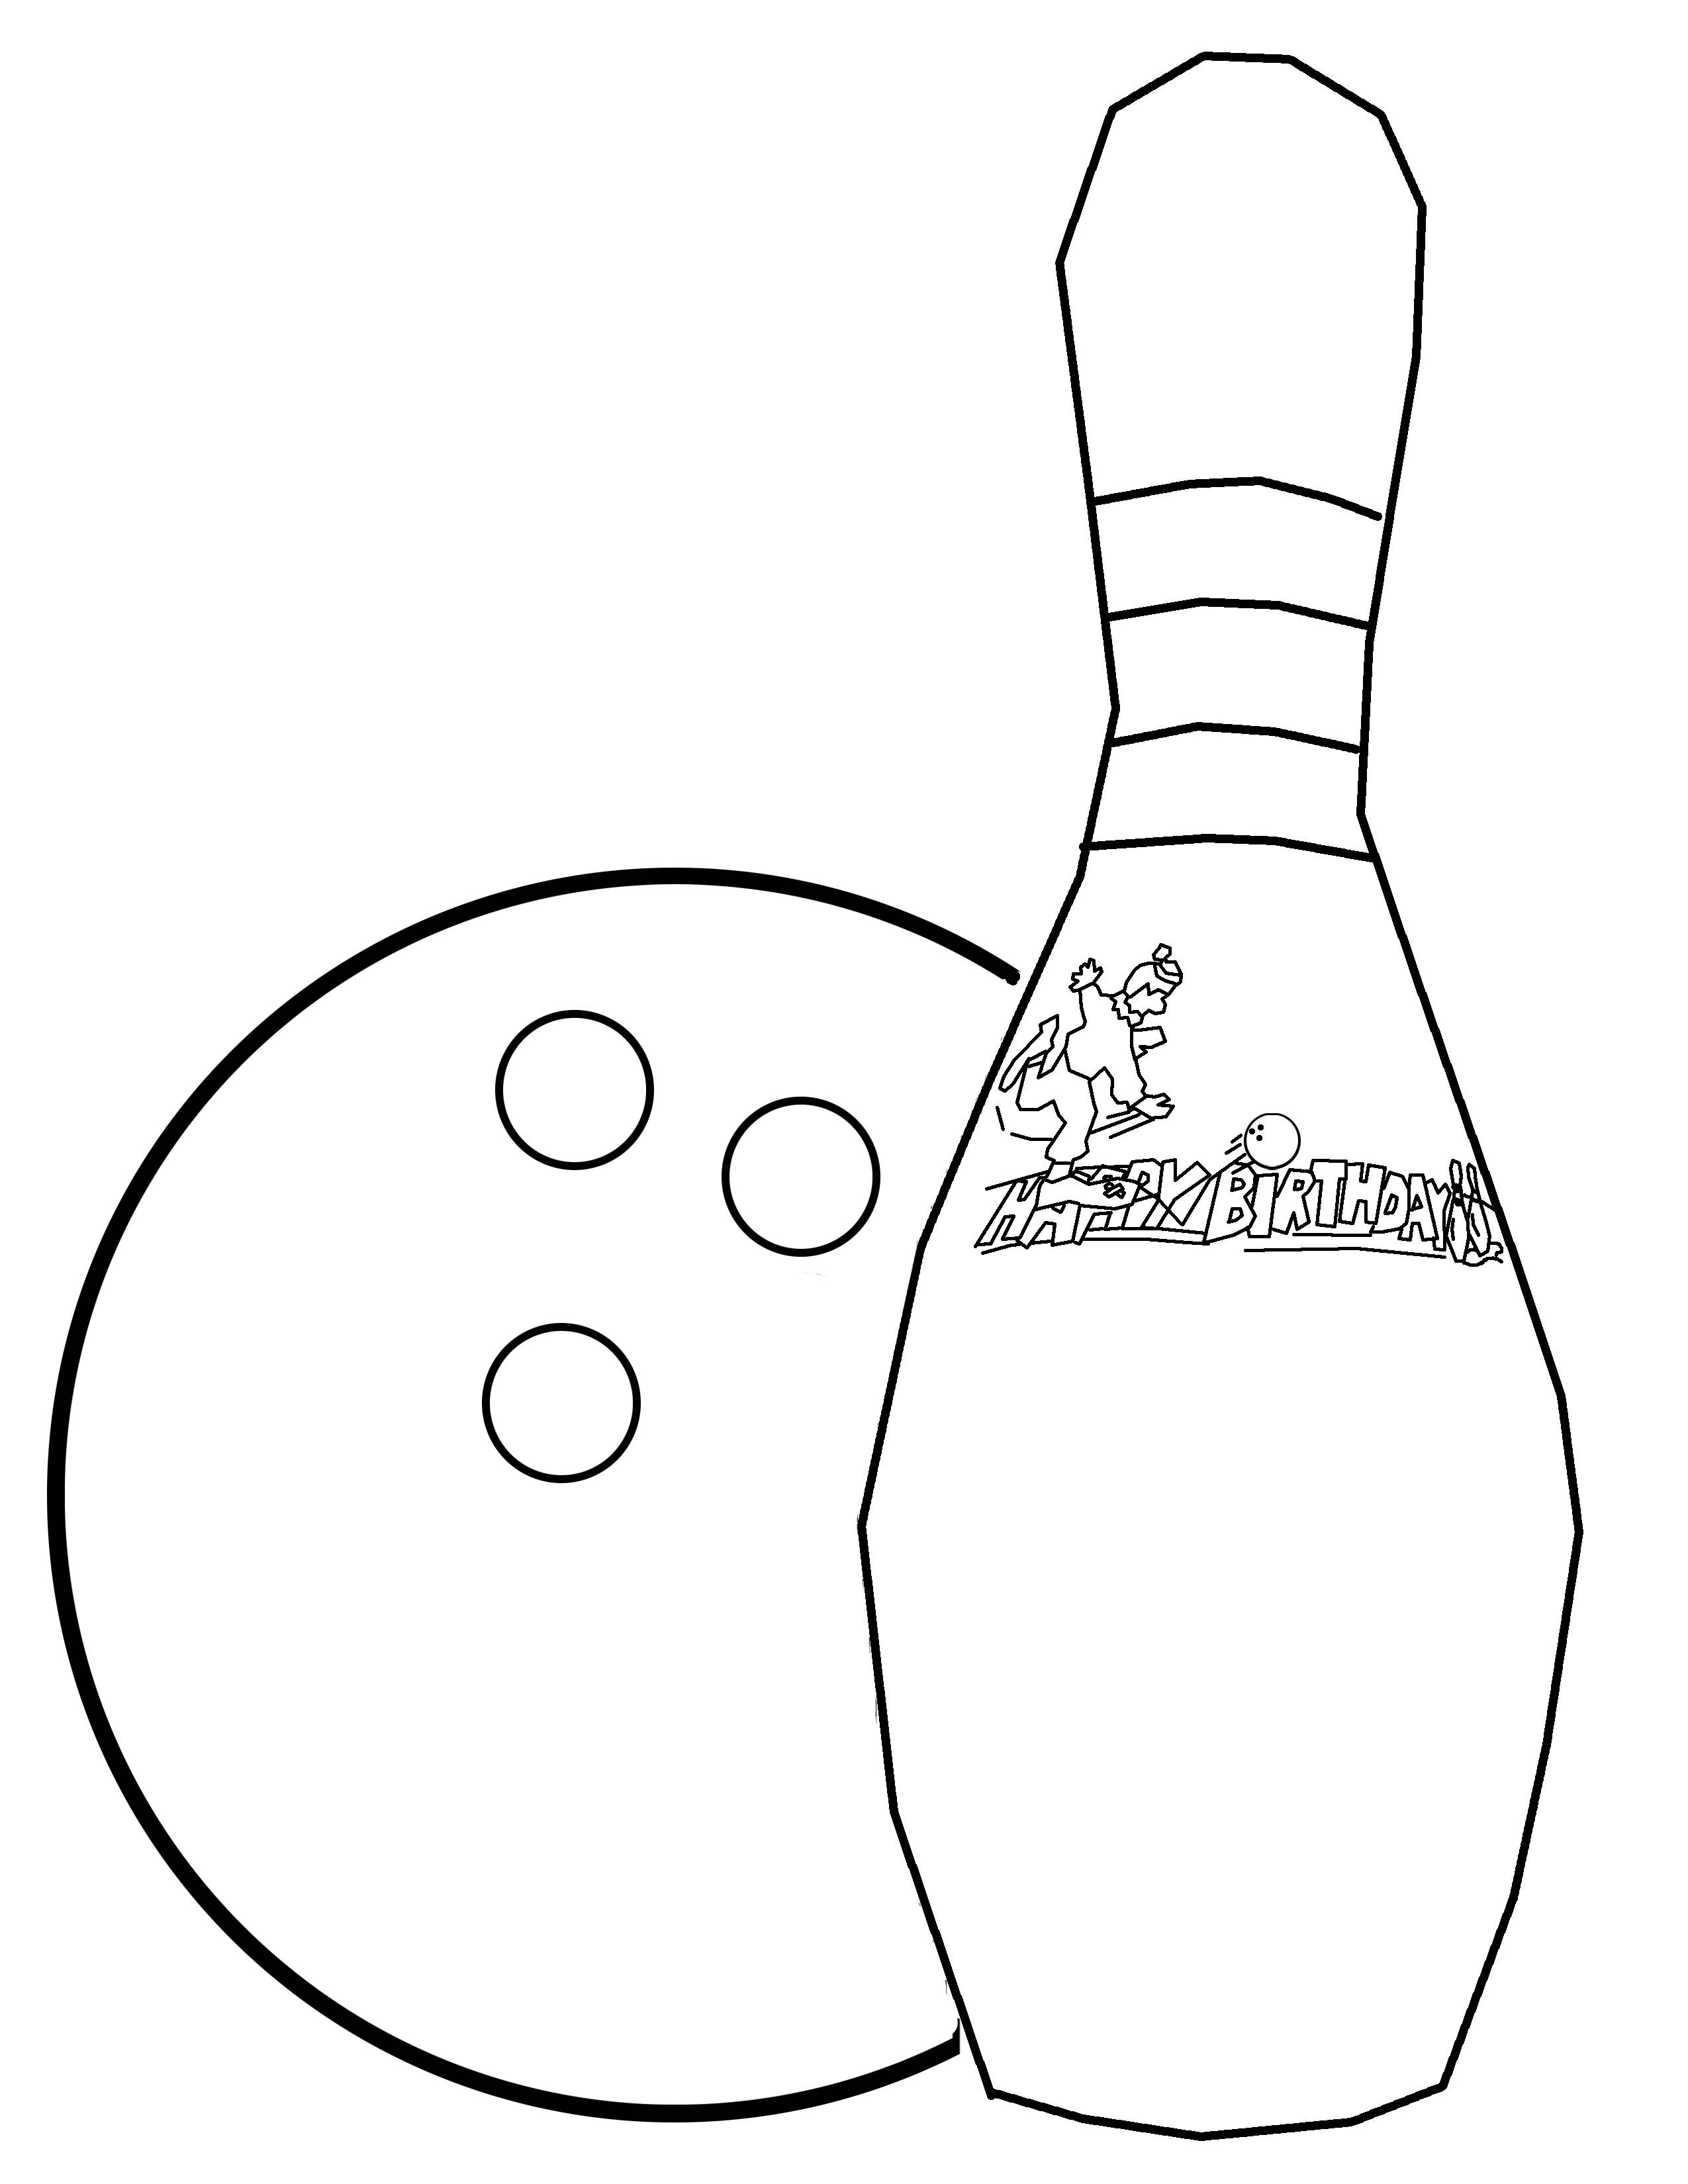 Bowling Coloring Pages Printable At Getcolorings.com | Free Printable